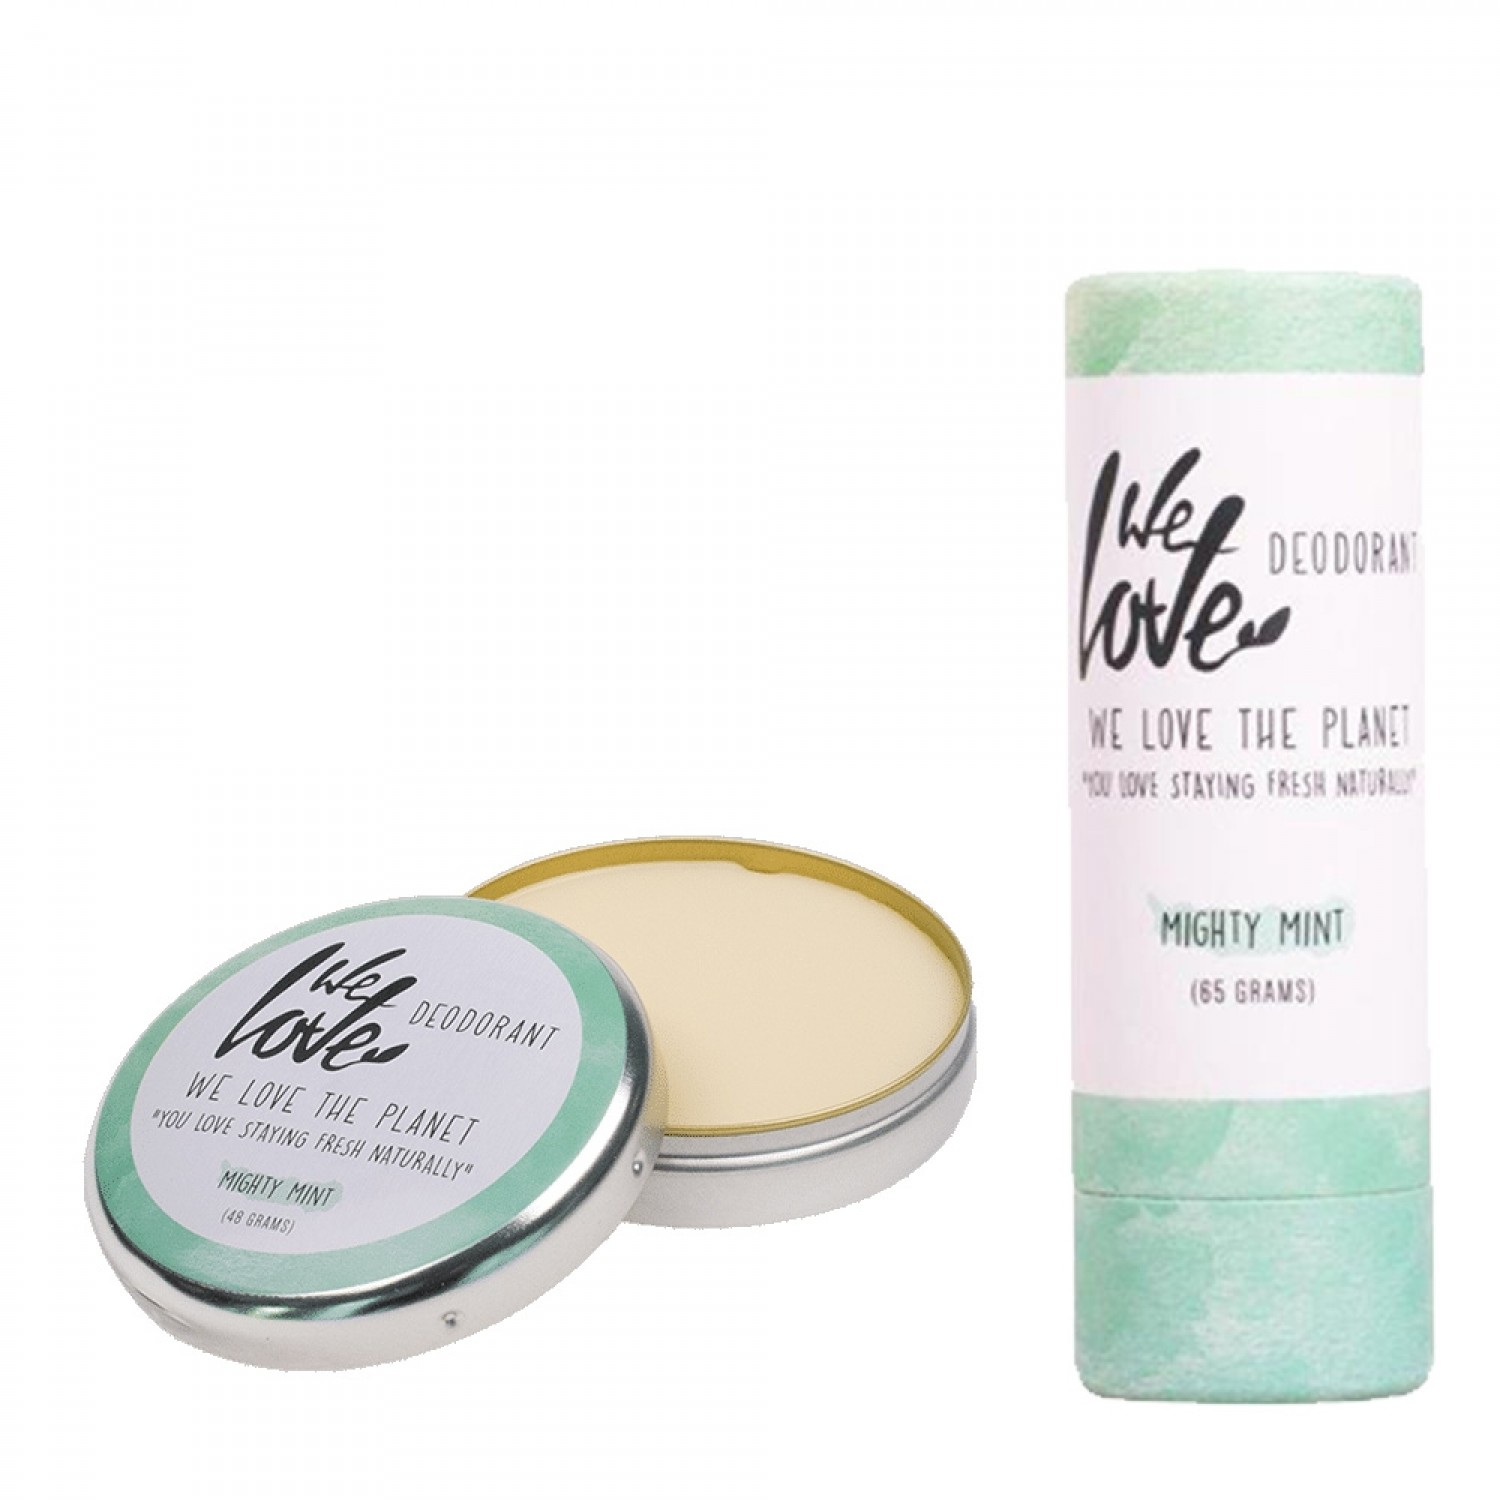 Mighty Mint Deodorant Stick or Cream » We love the Planet